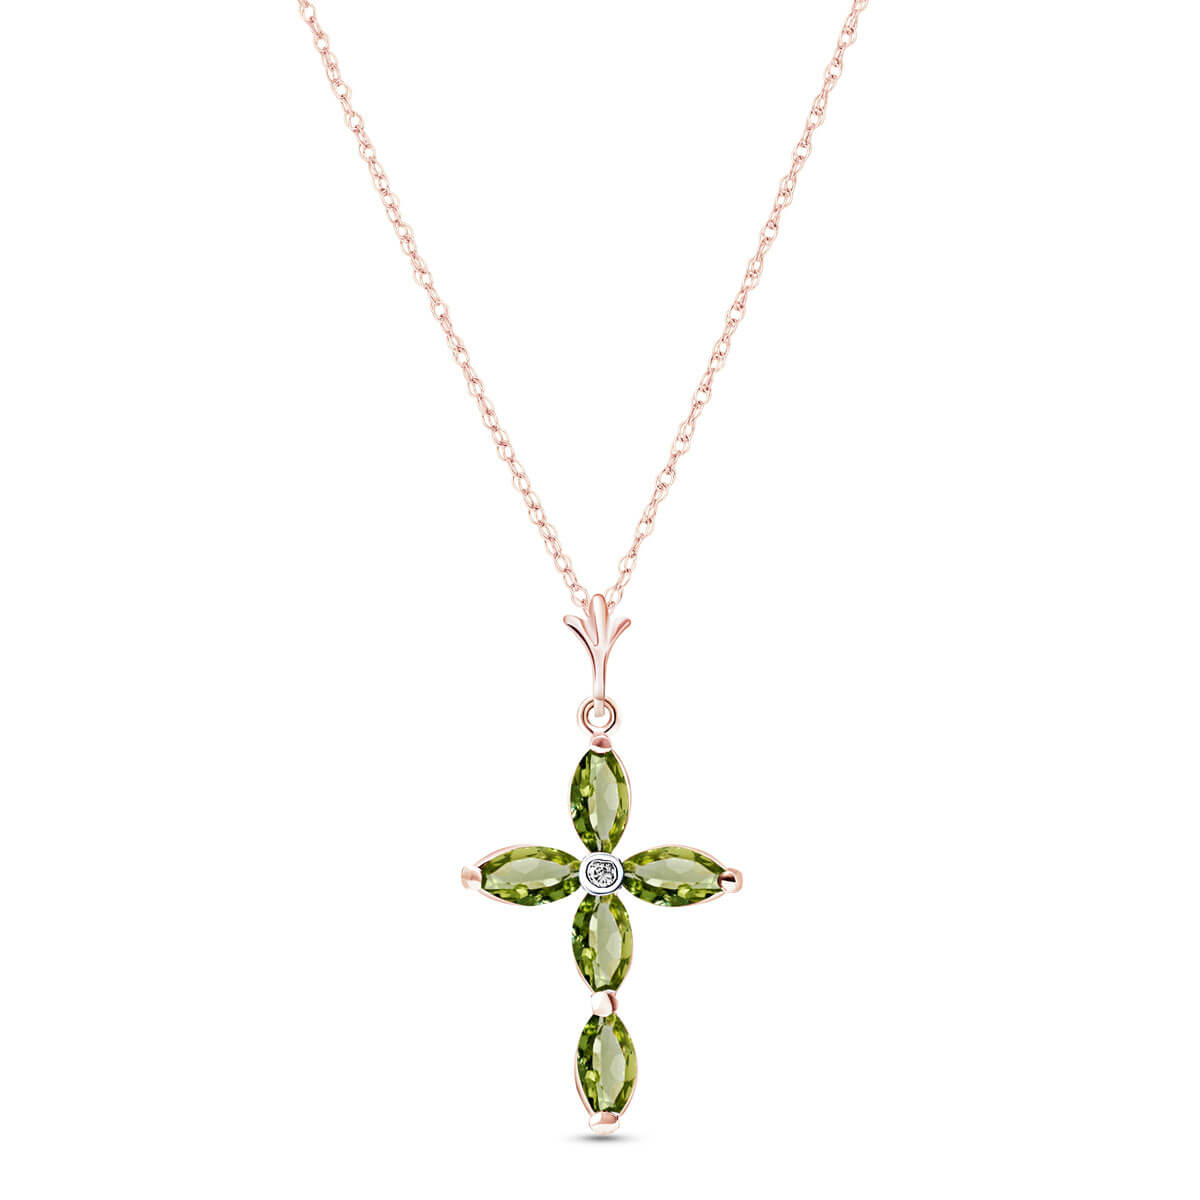 Marquise Cut Green Amethyst Pendant Necklace 1.1 ctw in 9ct Rose Gold